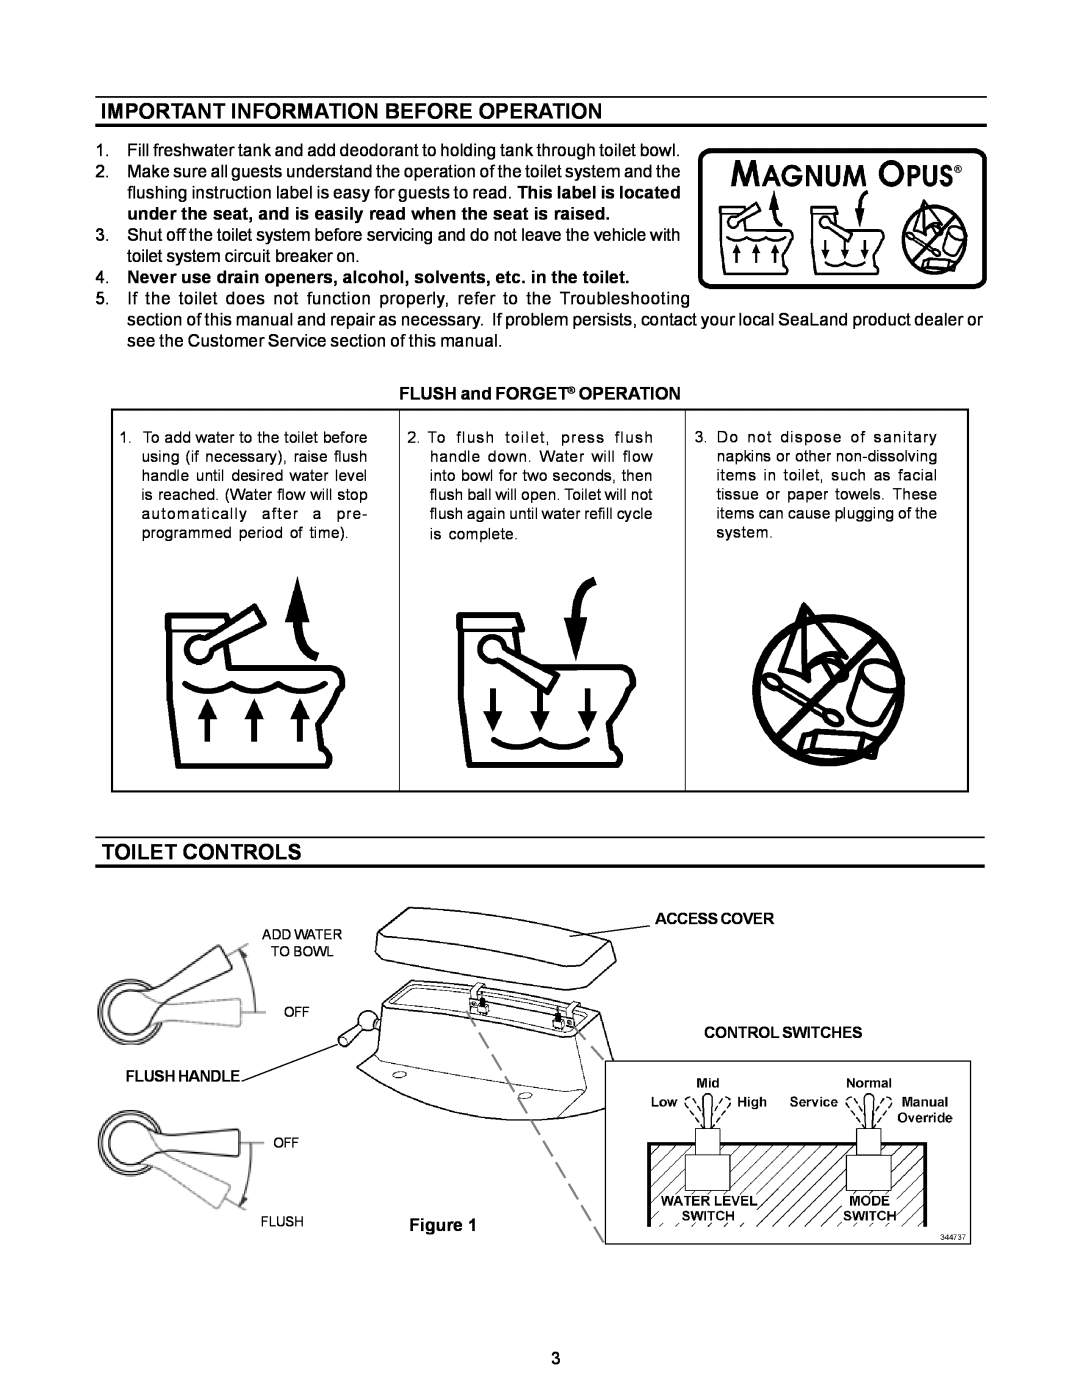 Dometic 3000 Series owner manual Important Information Before Operation, Toilet Controls, FLUSH and FORGET OPERATION 